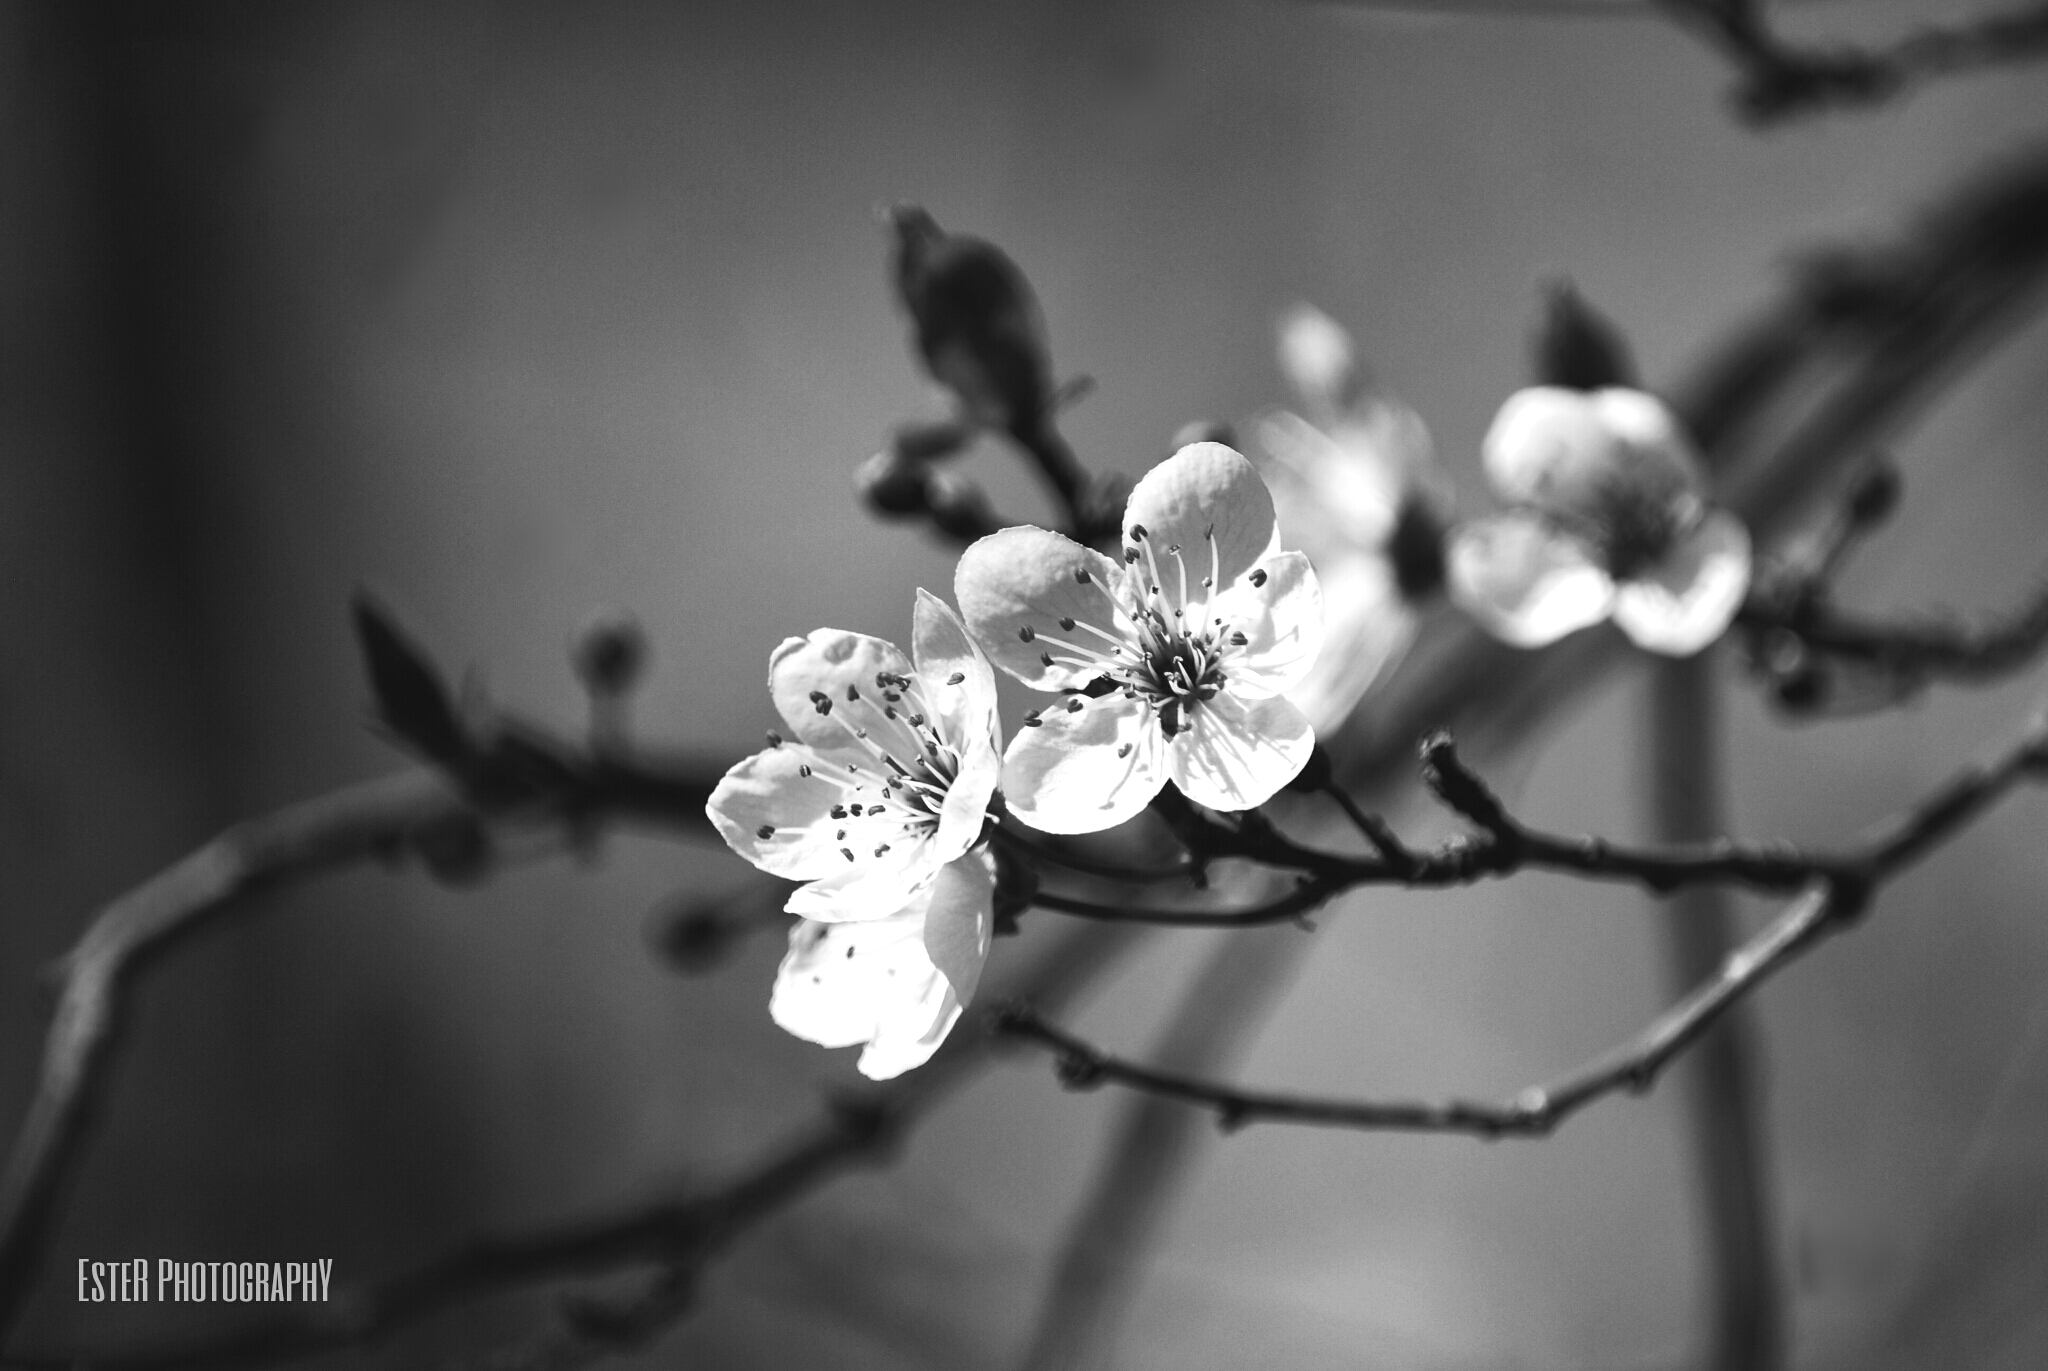 User EsteR PhotographY Takes Amazing B&W Flower Shots - Create + ...